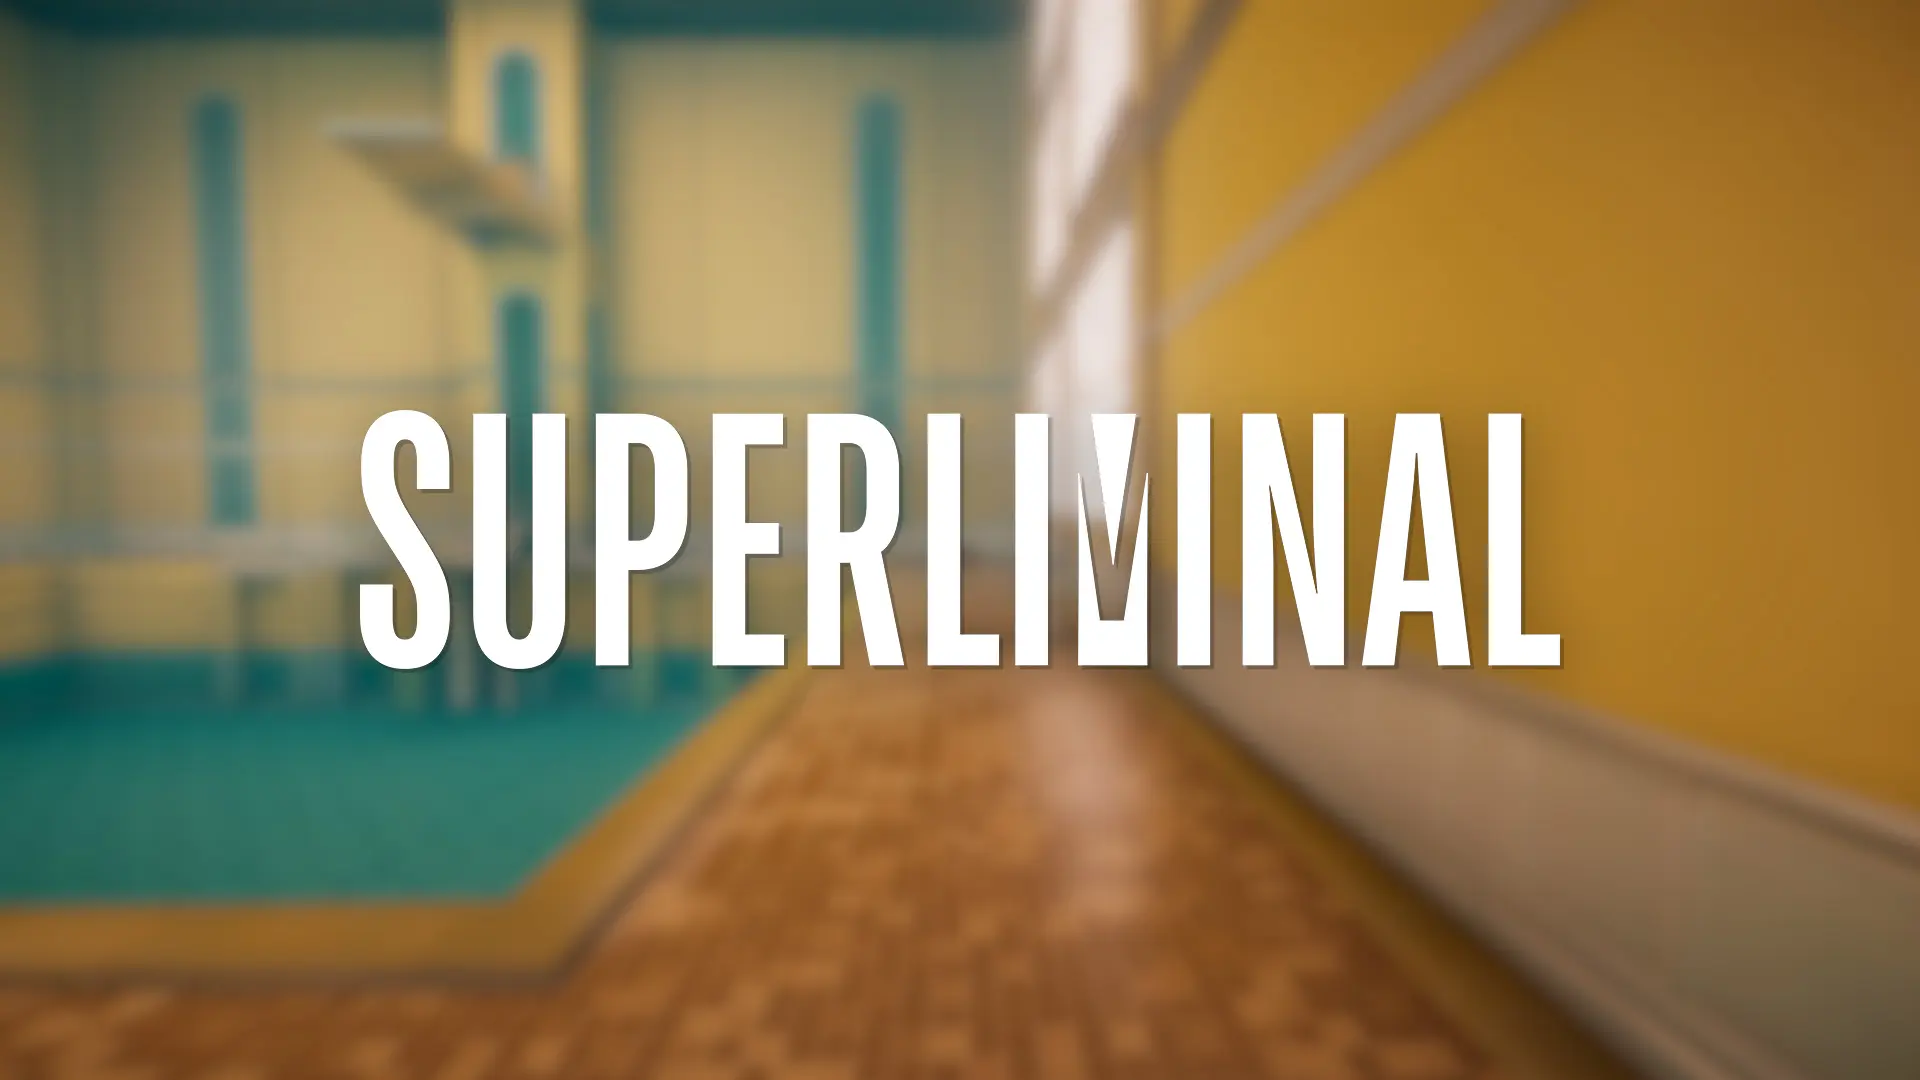 Superliminal launches today on Steam